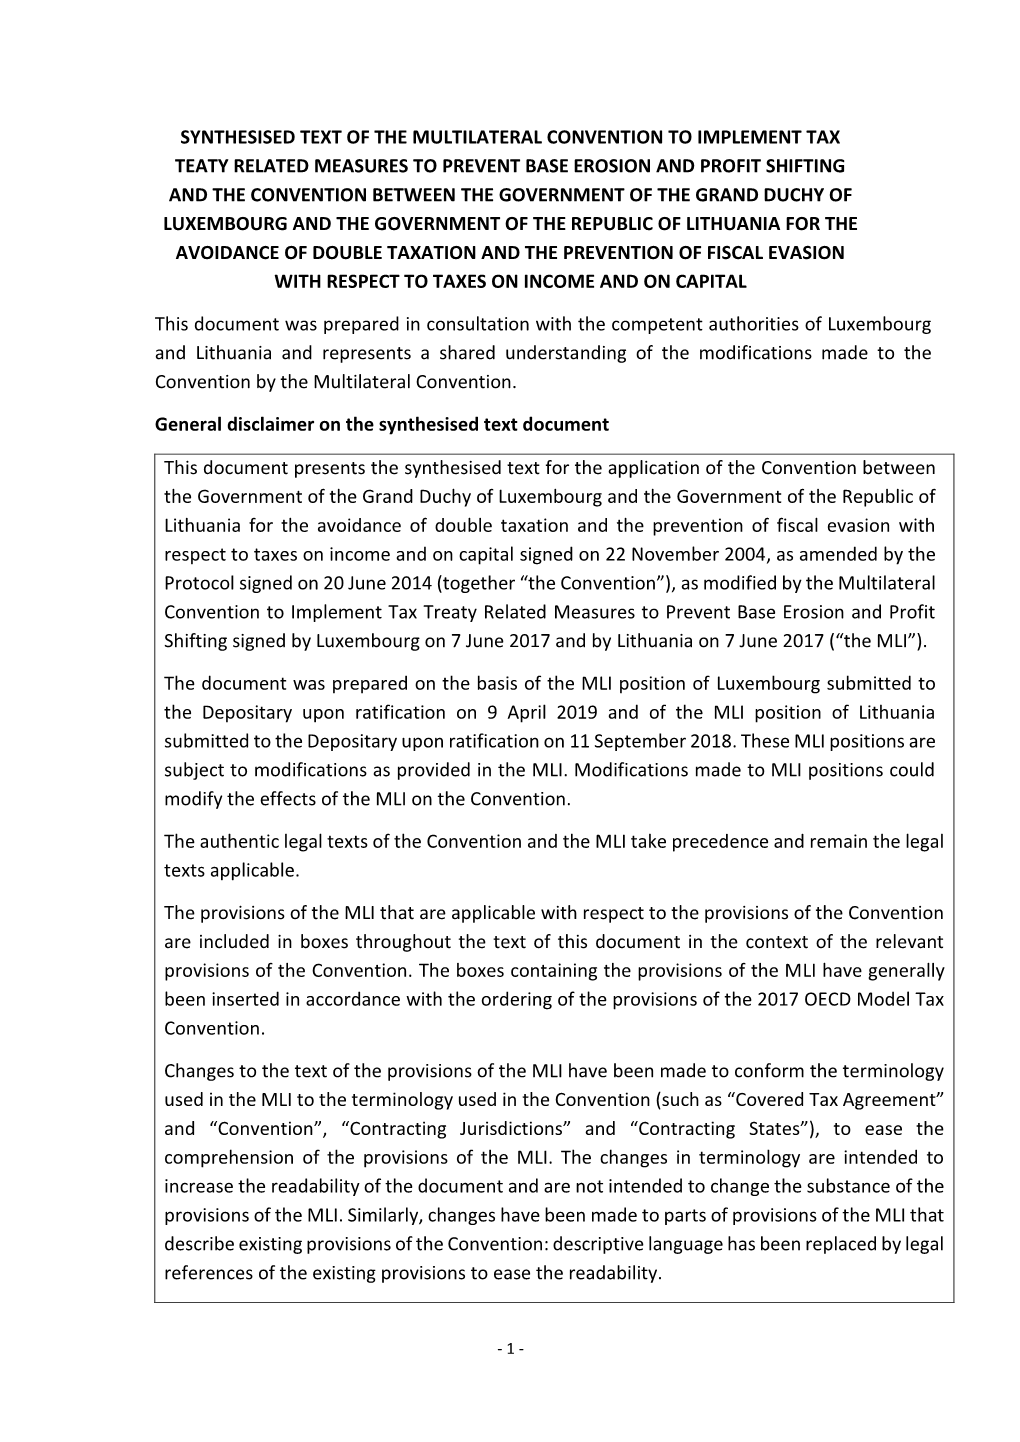 Synthesised Text of the Multilateral Convention to Implement